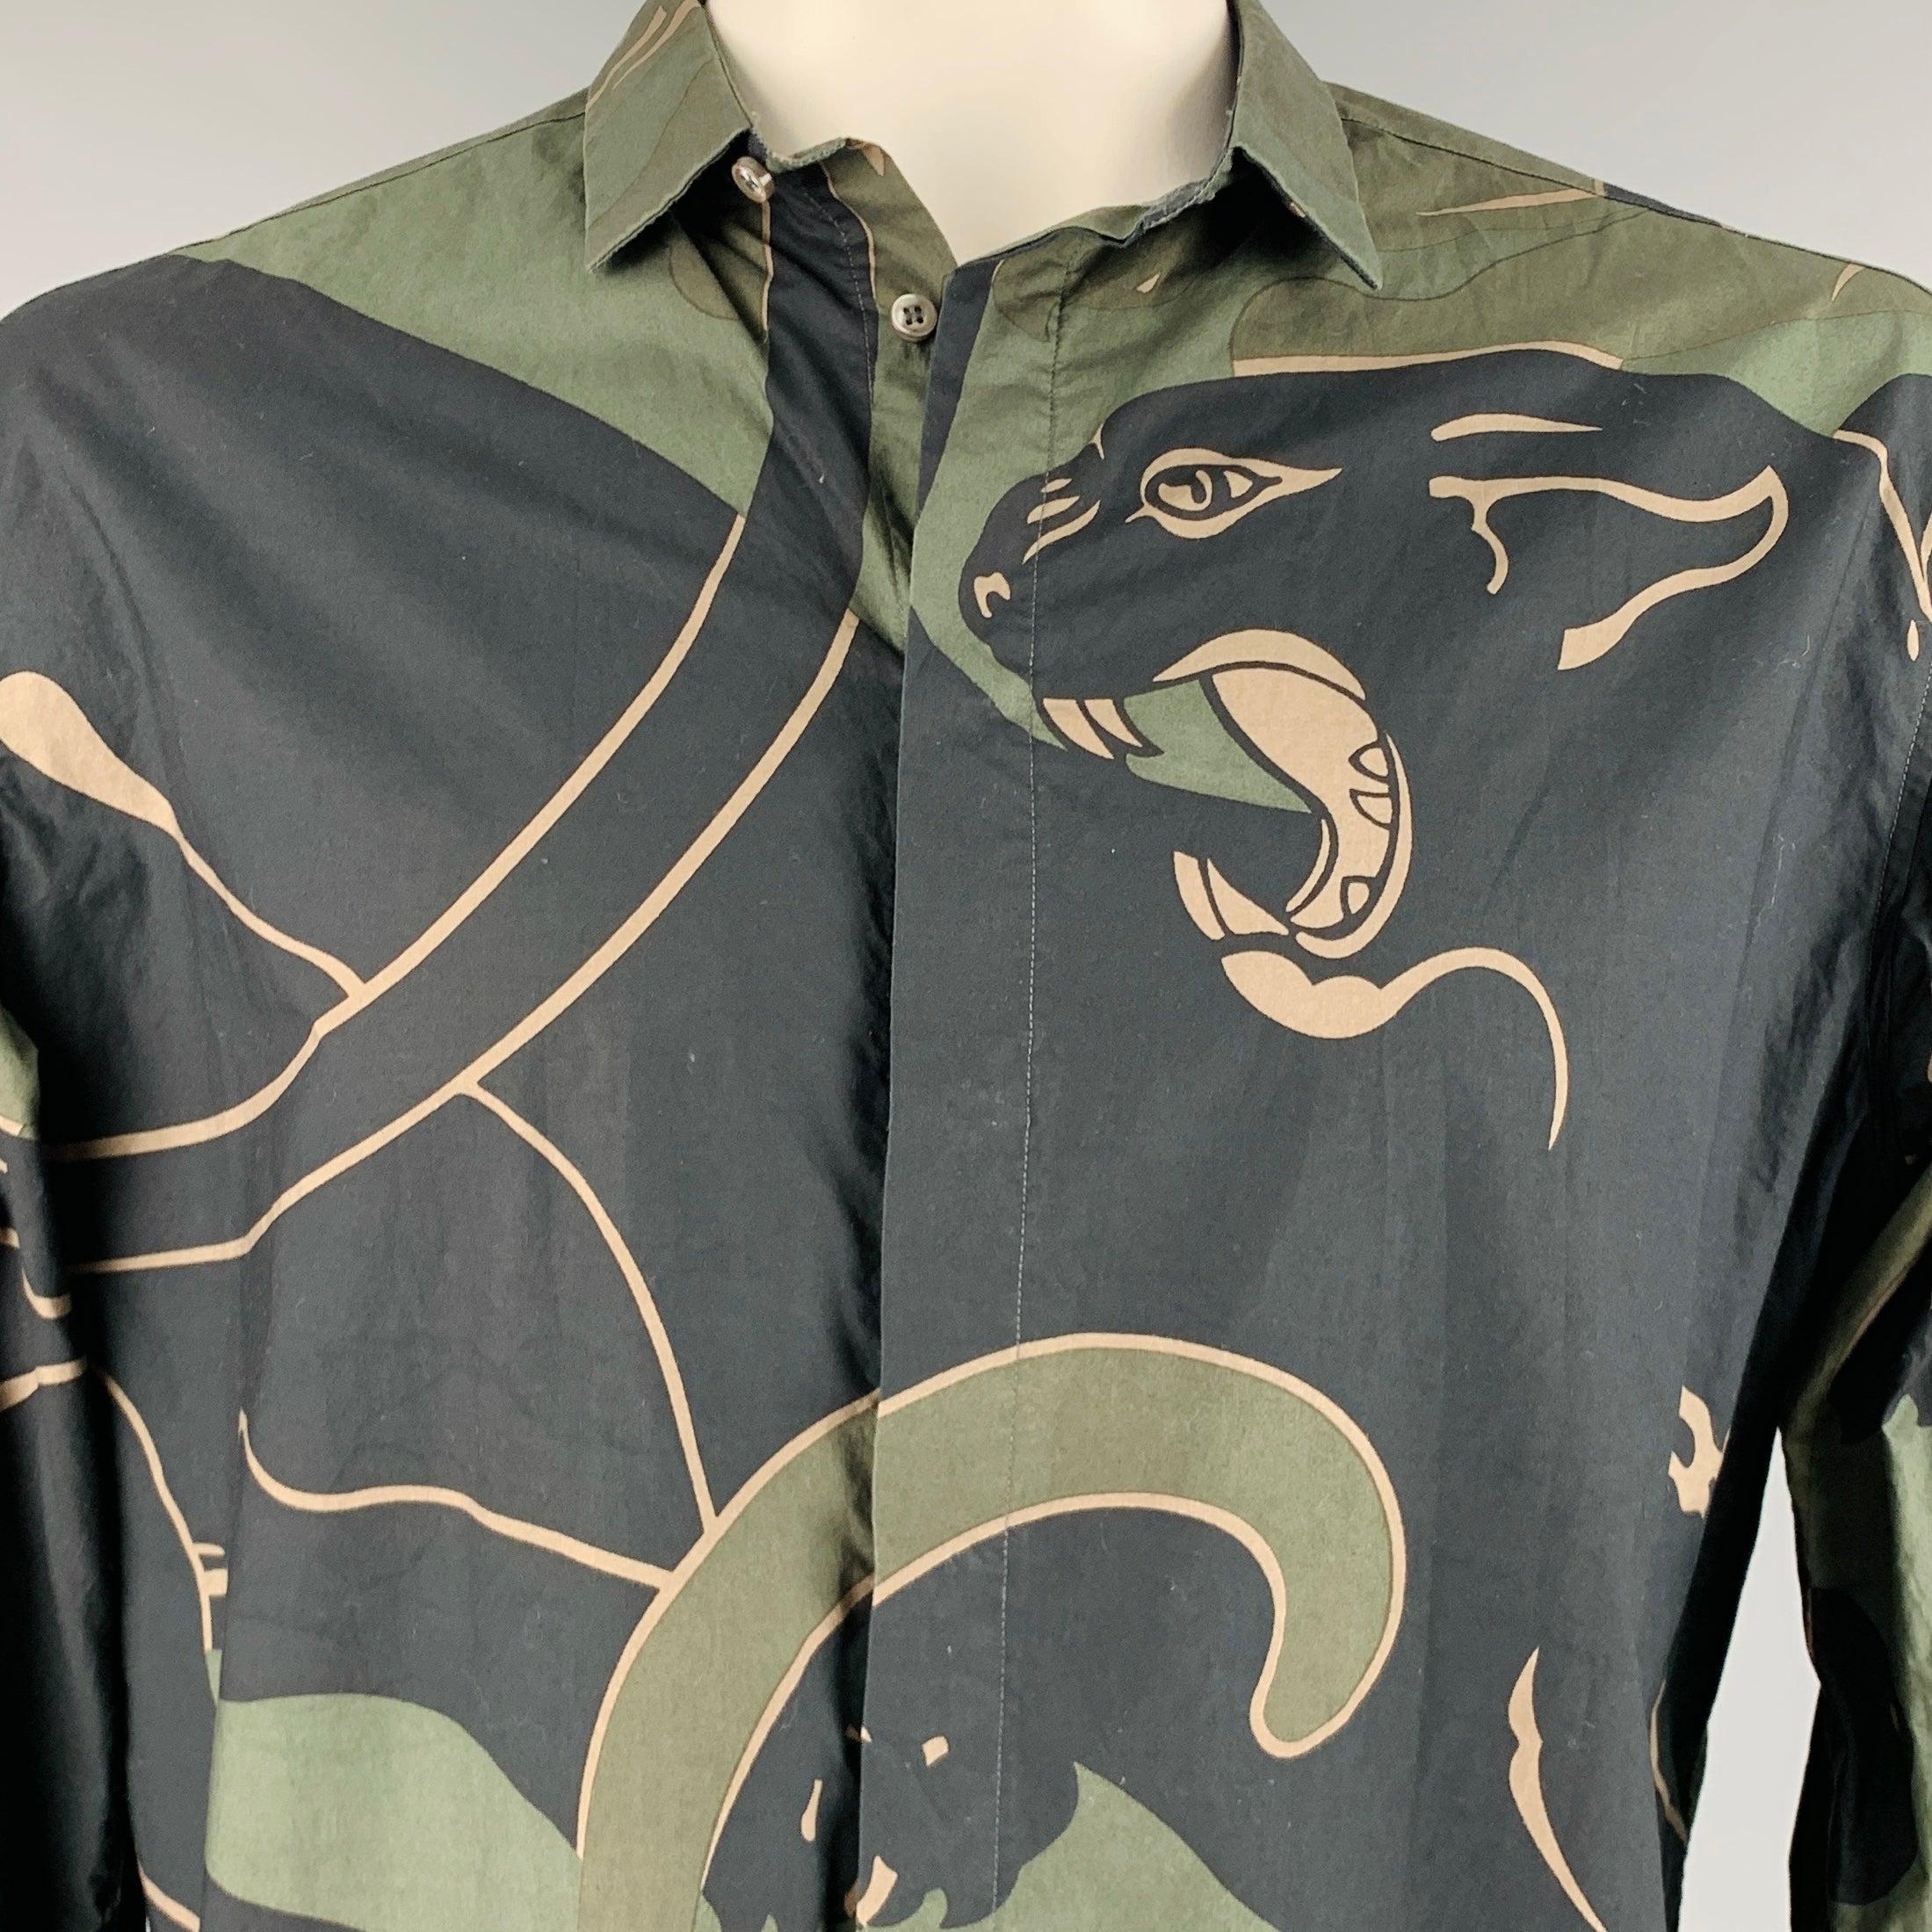 VALENTINO
long sleeve shirt in a black
and olive green cotton fabric featuring panther print, spread collar, and hidden button closure. Made in Italy.Very Good Pre-Owned Condition. Minor mark. 

Marked:   44/17.5 

Measurements: 
 
Shoulder: 17.5